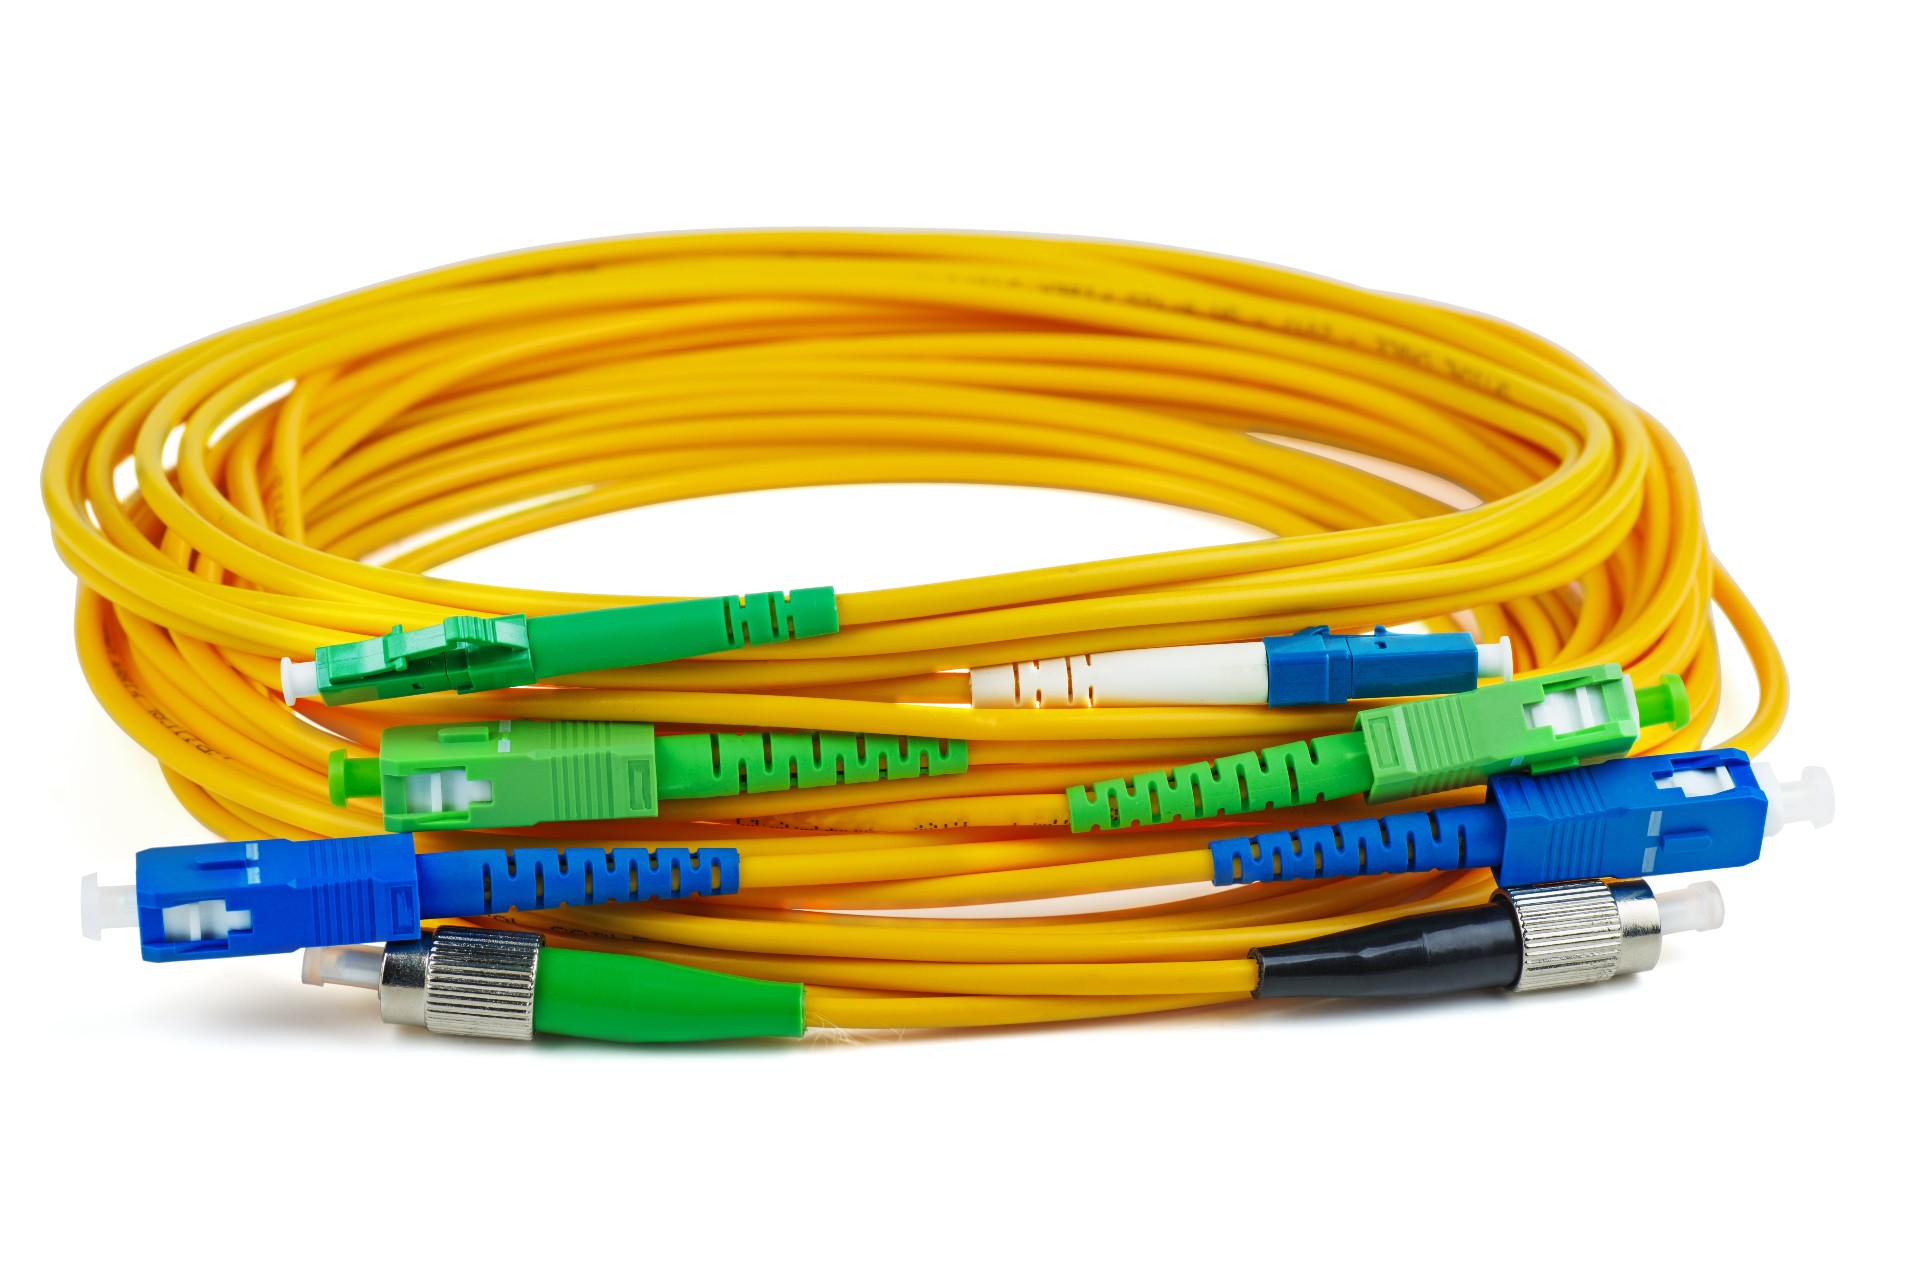 How to manage fiber optic cables in a server rack - RackSolutions